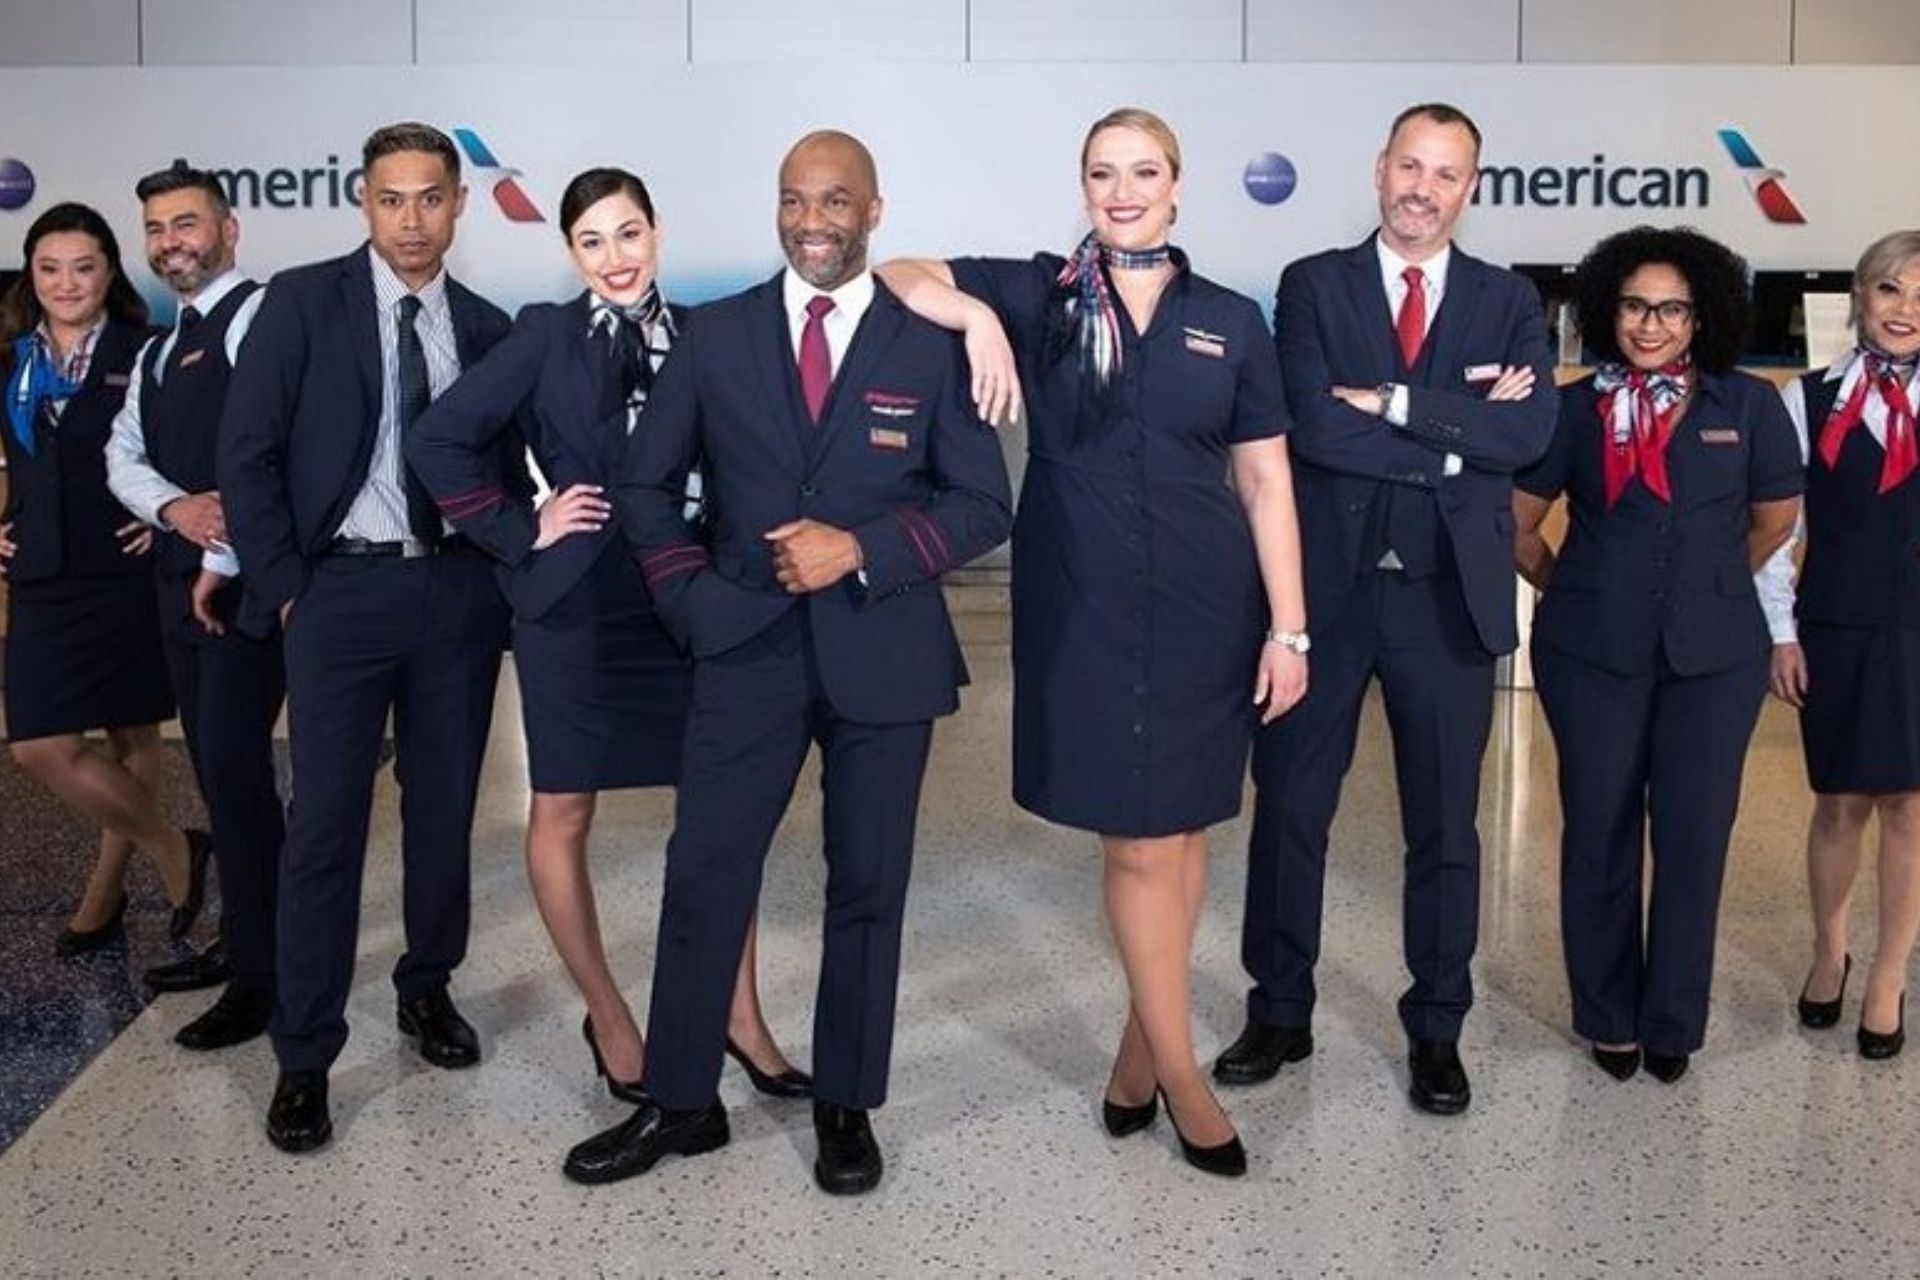 American Airlines crew